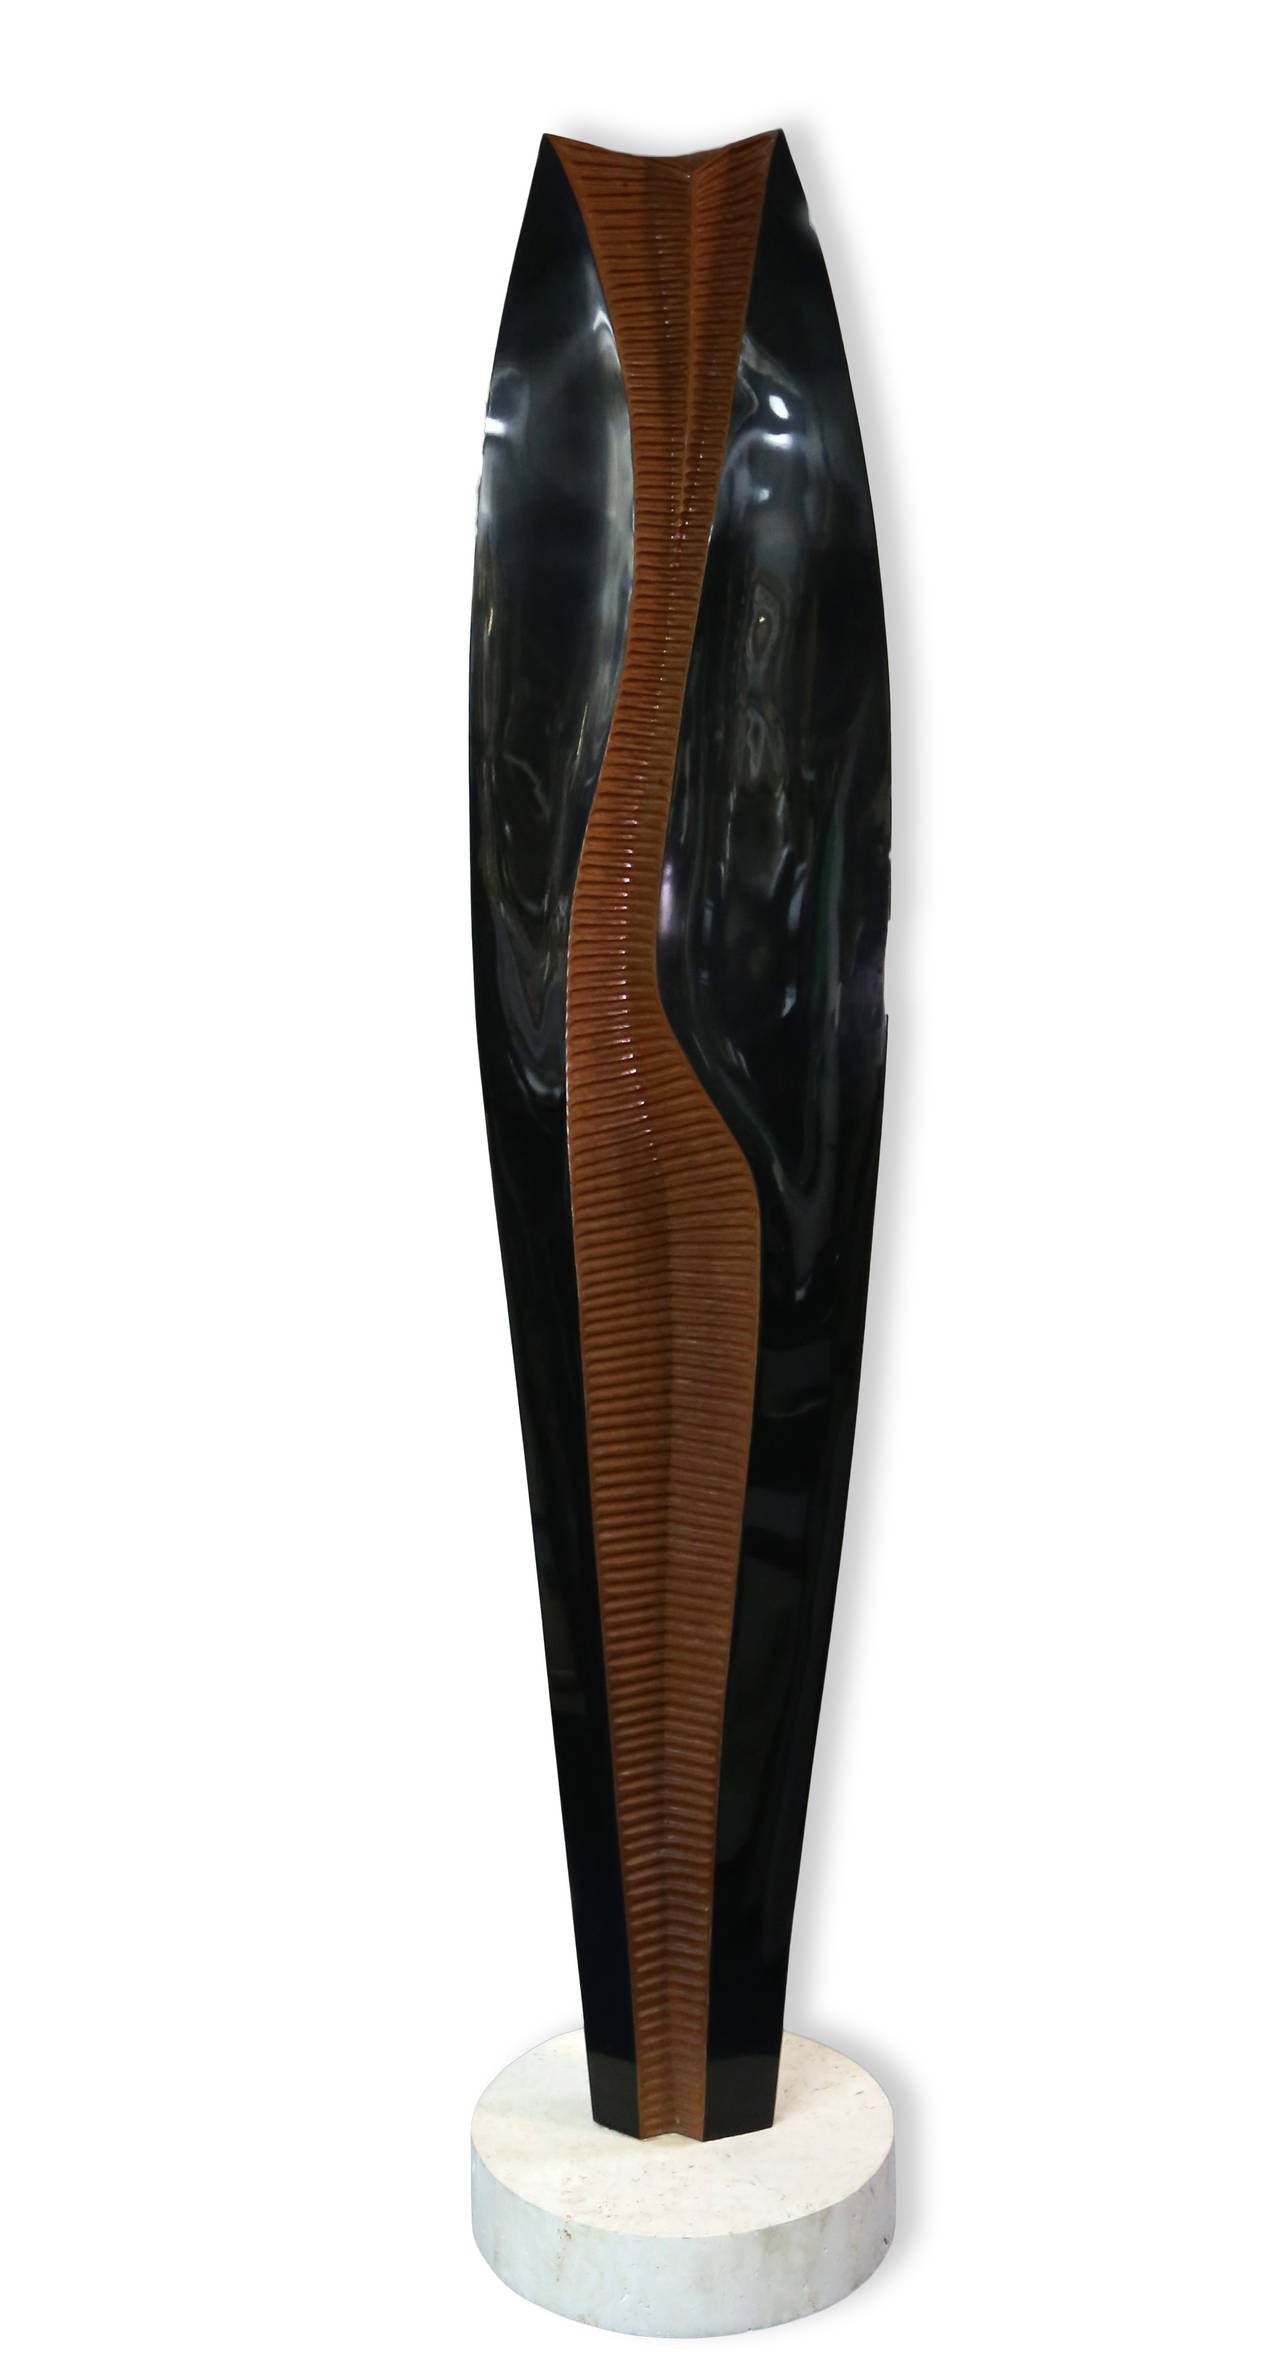 Henry Moretti Abstract Sculpture - Abstract Figure, Large Standing Sculpture by Henri Moretti